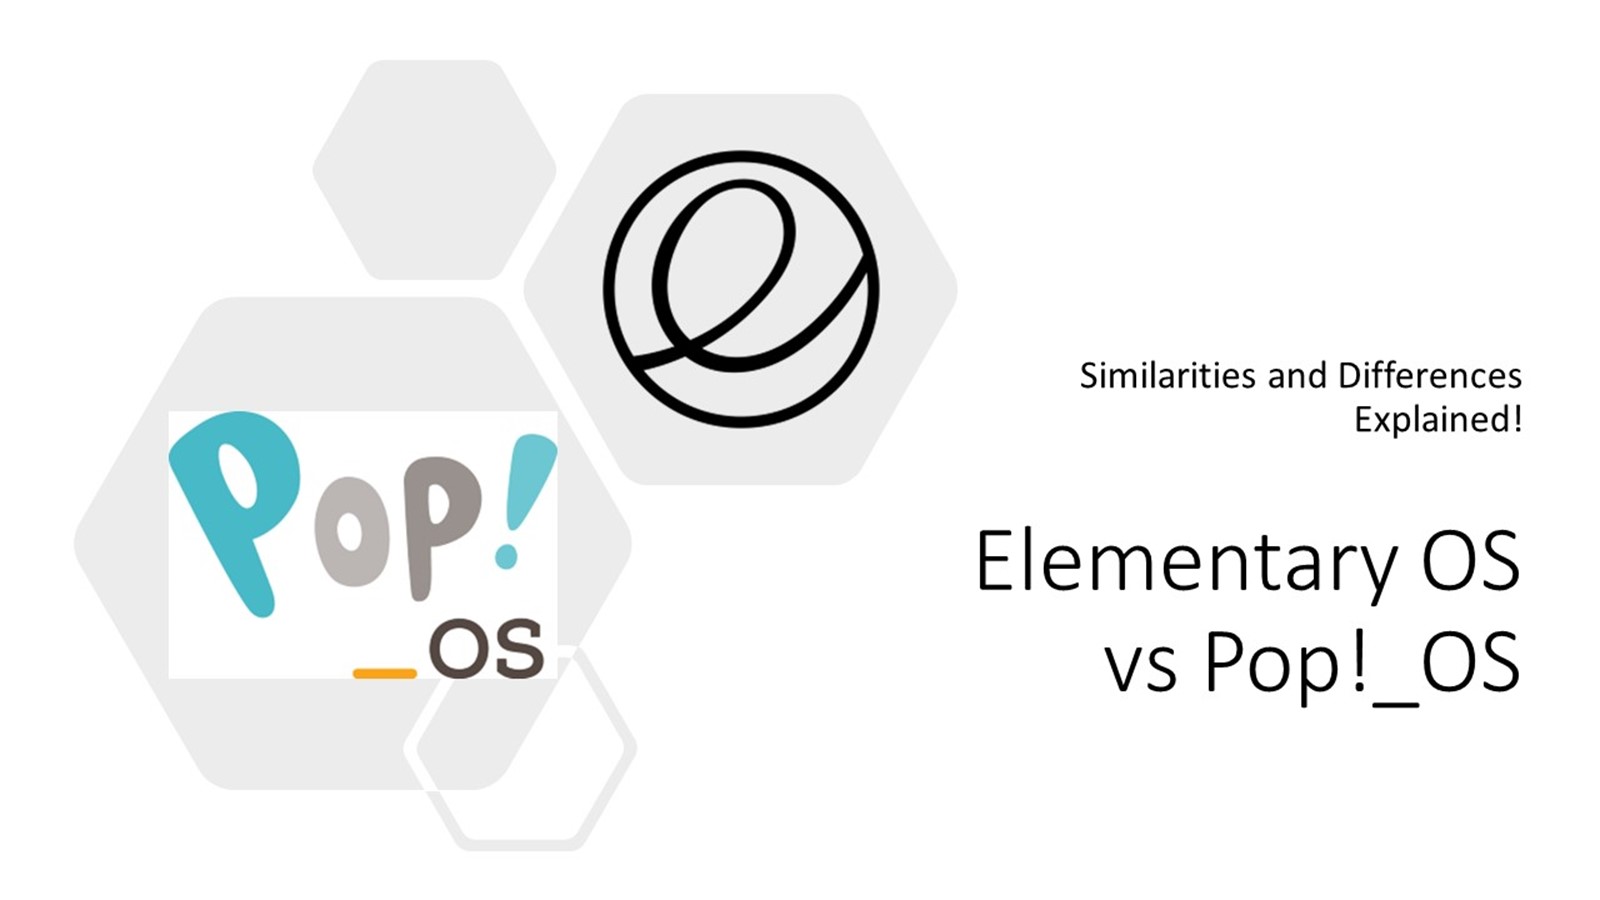 Elementary OS vs Pop!_OS: Similarities & Differences!